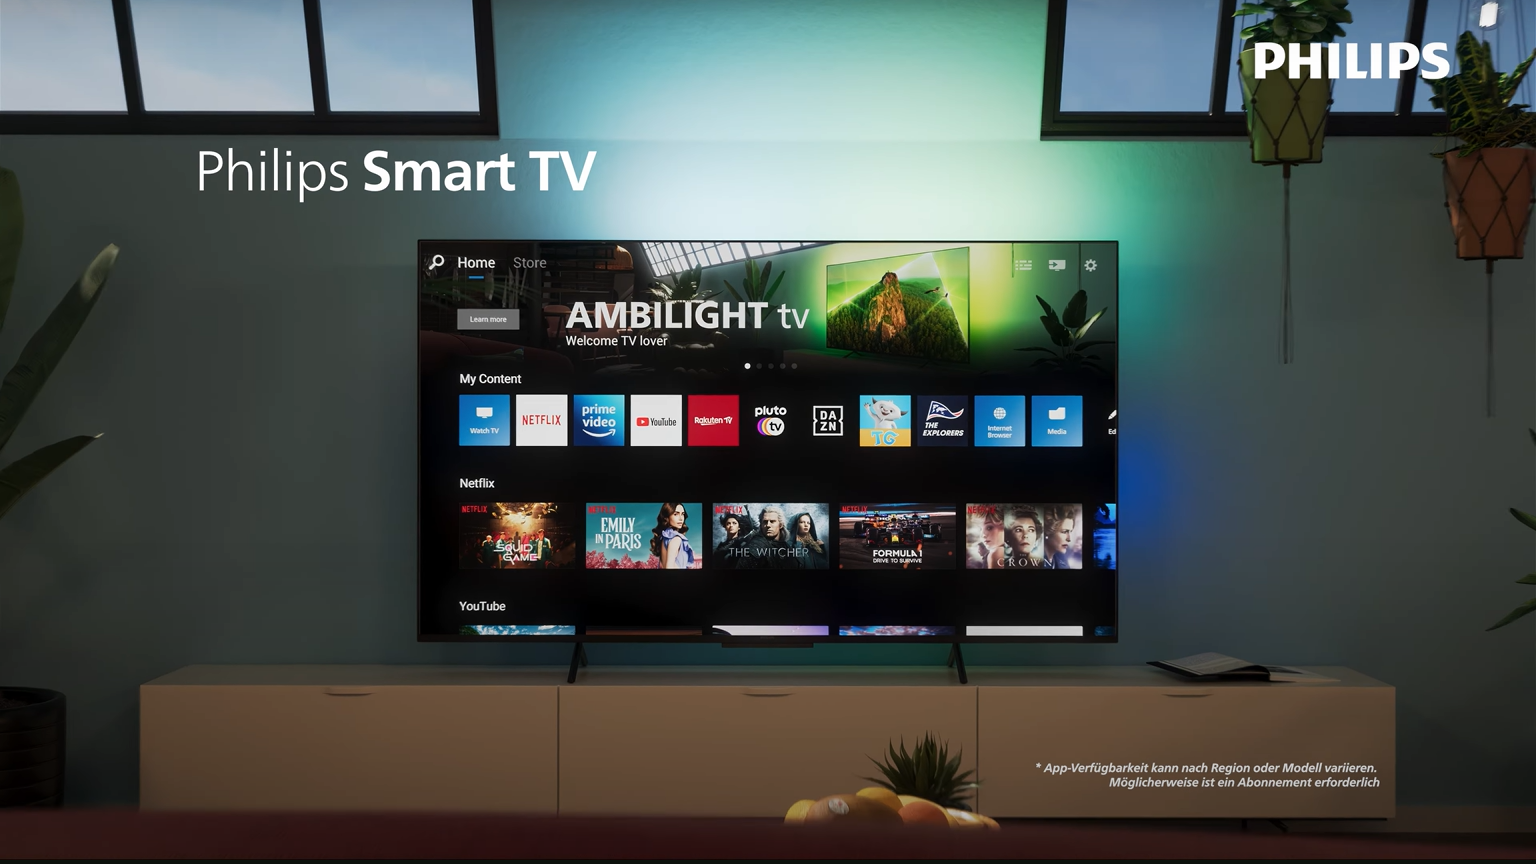 Philips smart TV on a media unit with the Titan OS home page visible